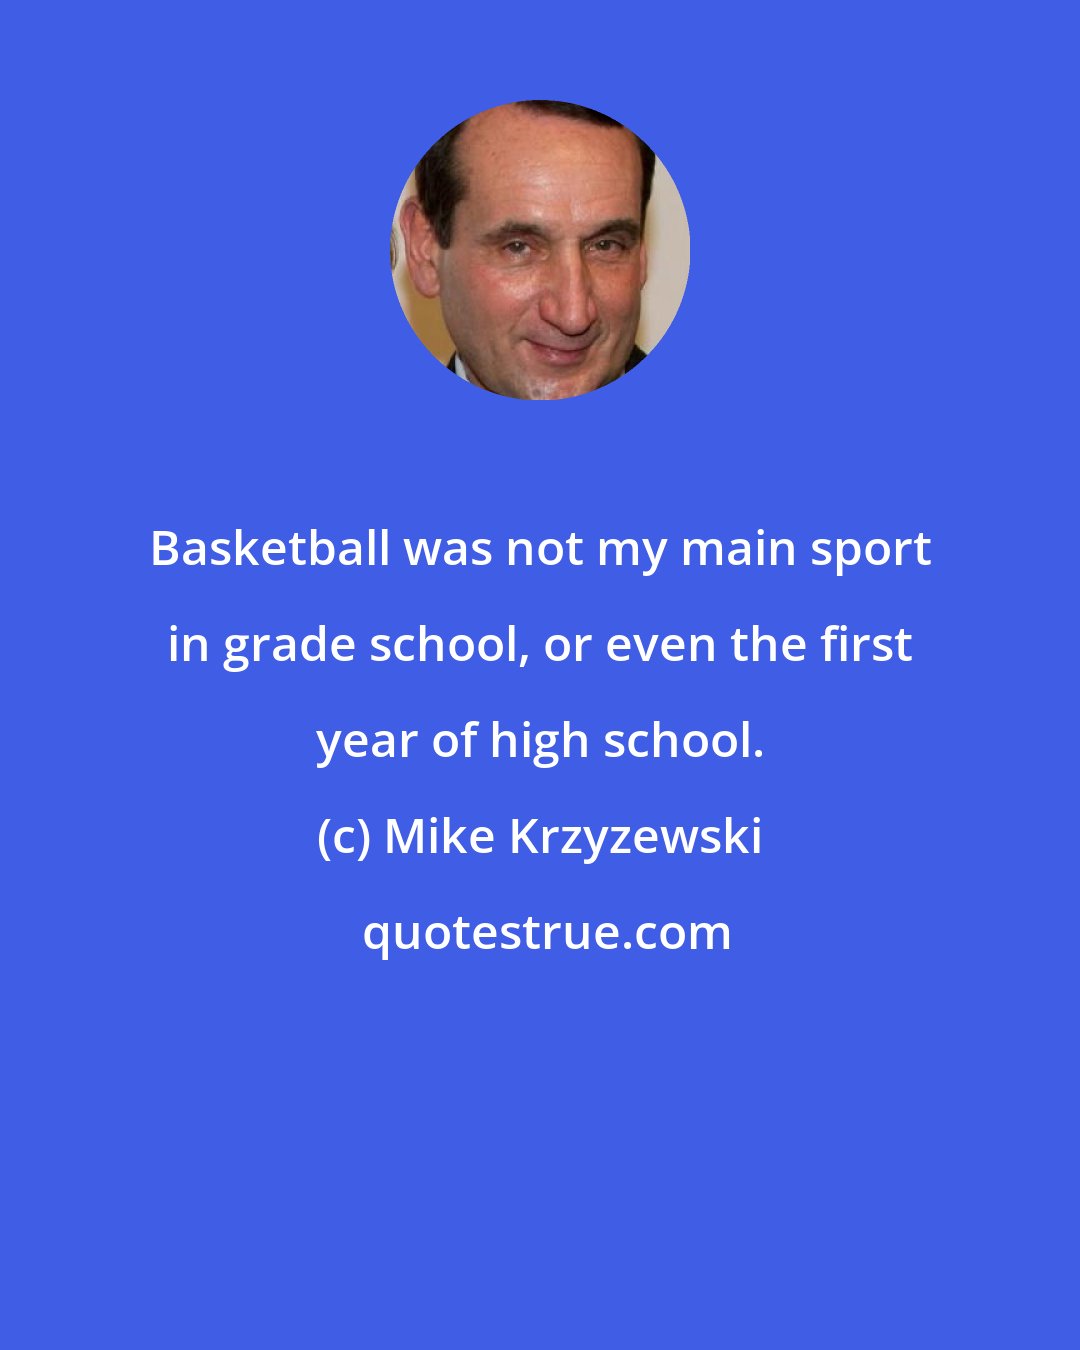 Mike Krzyzewski: Basketball was not my main sport in grade school, or even the first year of high school.